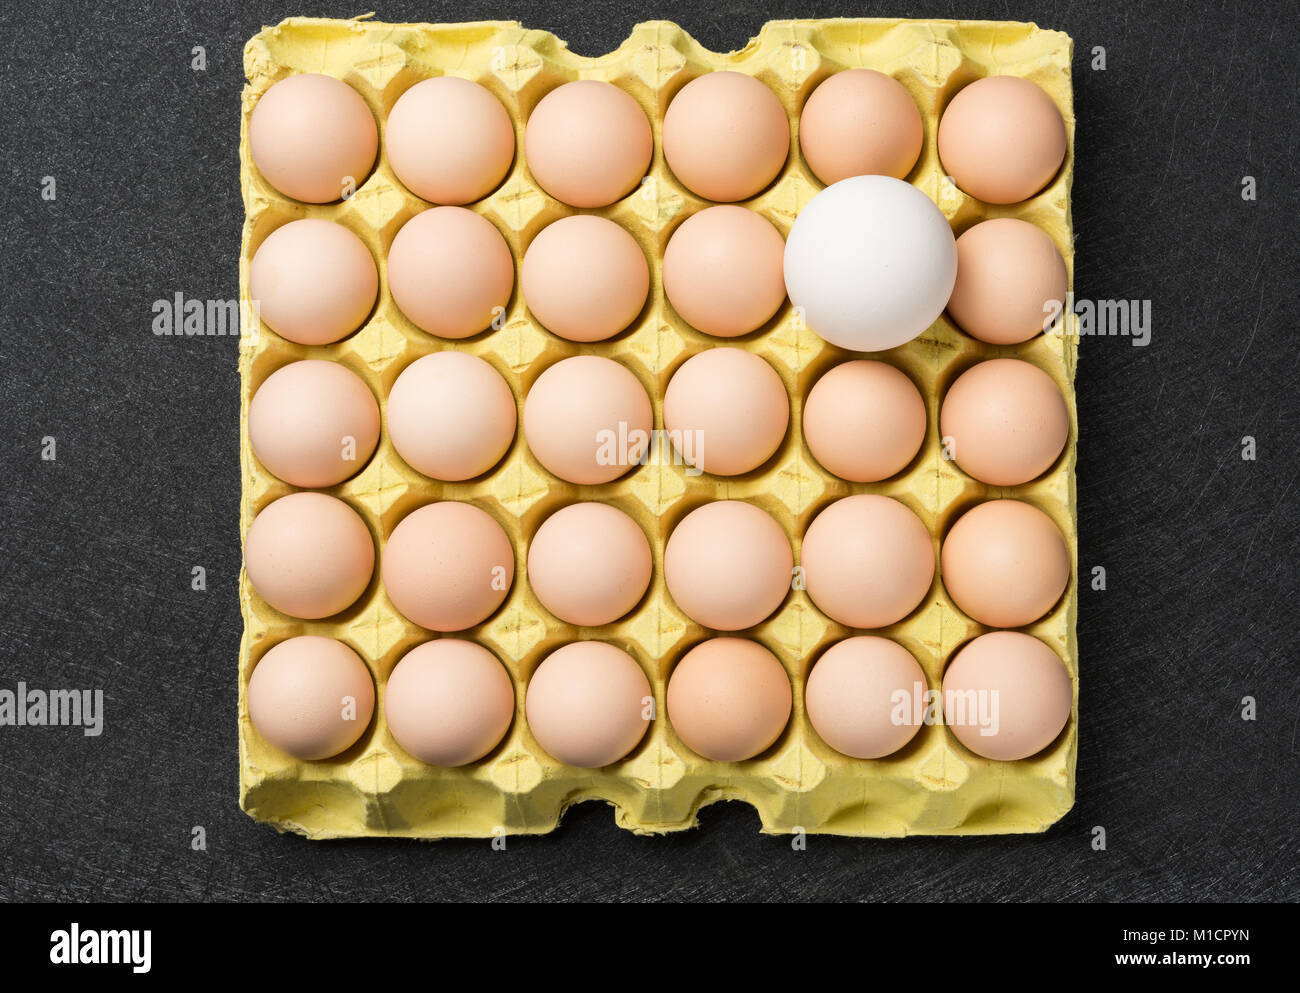 giant size goose egg between small chicken eggs concept of size comparison Stock Photo